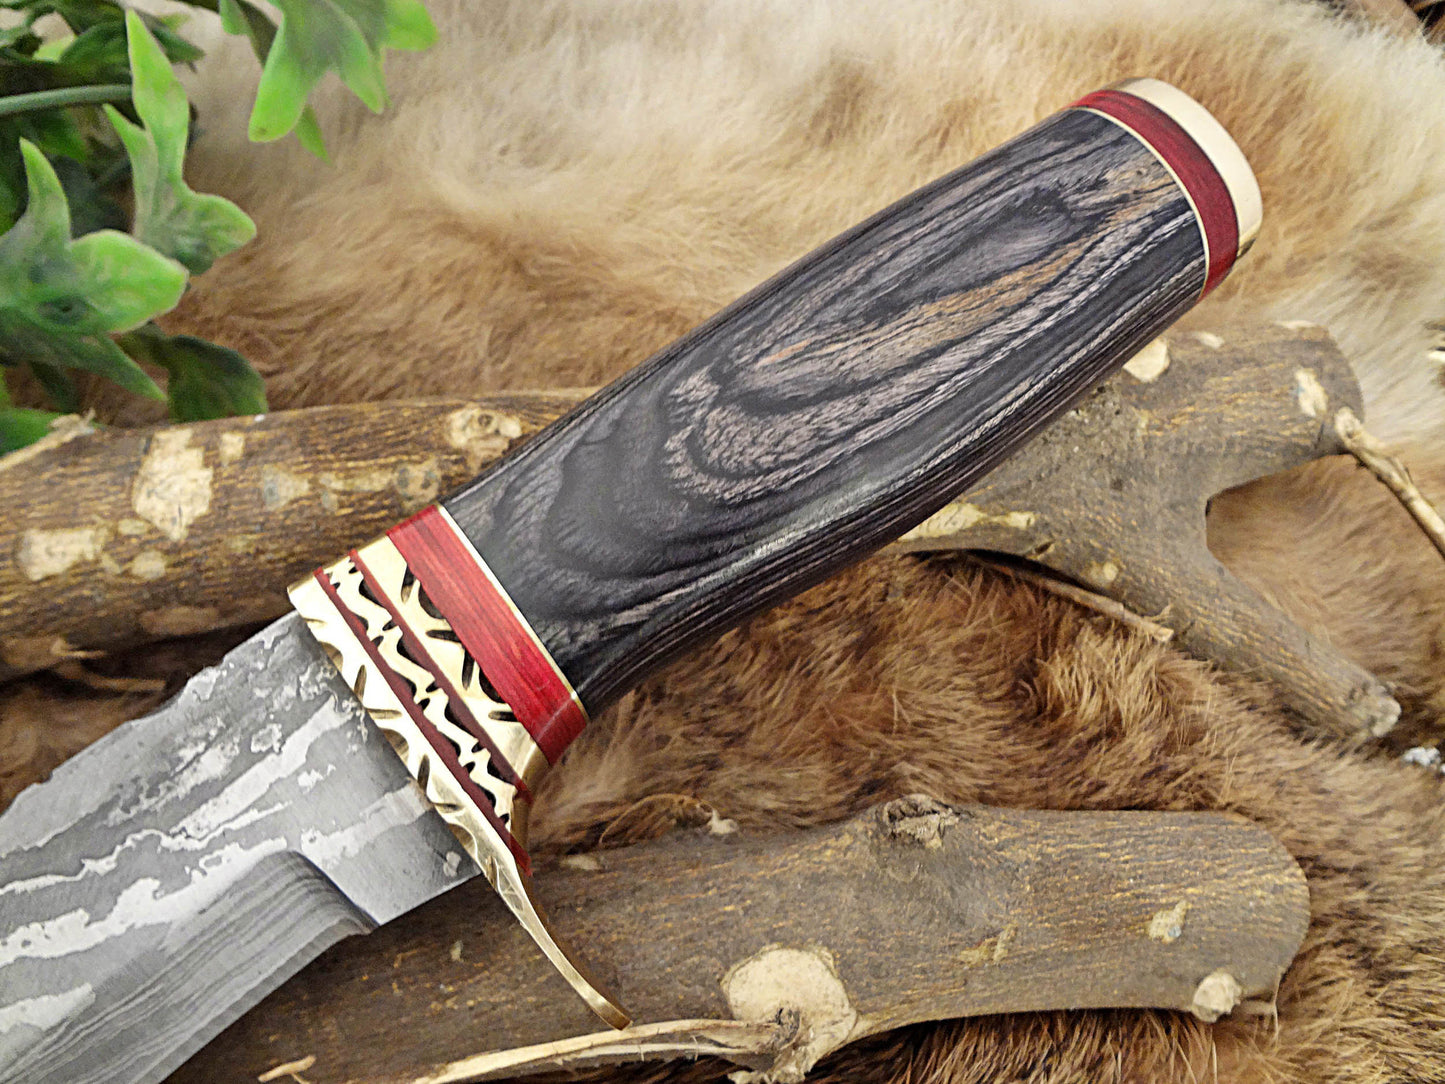 Damascus Steel Kukri Knife 15 Inches custom made Hand Forged With 10" long blade, Bull horn with engraved brass scale, Cow Leather Sheath